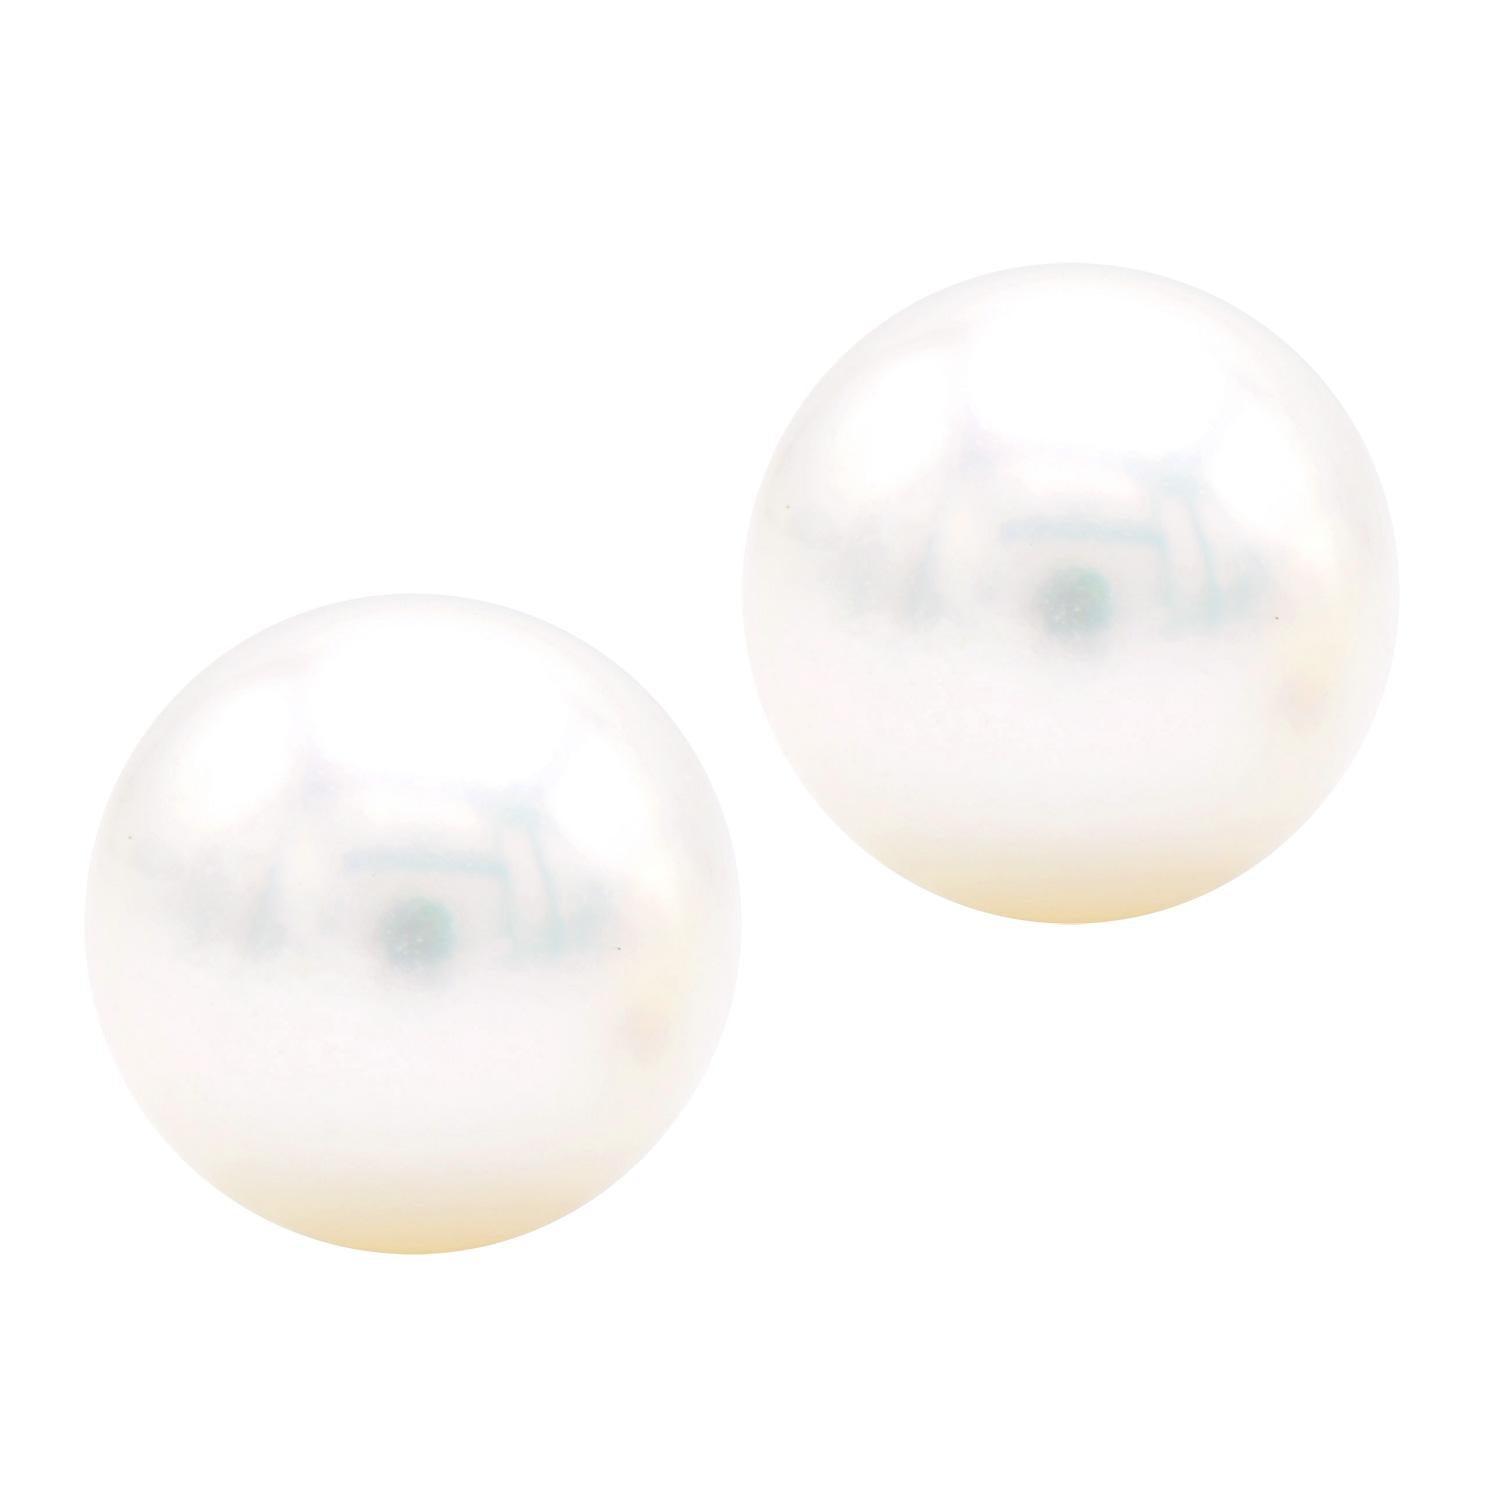 Cultured pearl stud earrings are the most classic and timeless piece of jewelry. They can be worn by anyone and everyone and make an excellent gift for all occasions. These 6.0-6.5mm cultured pearl earrings are perfectly matched and set in 14 karat